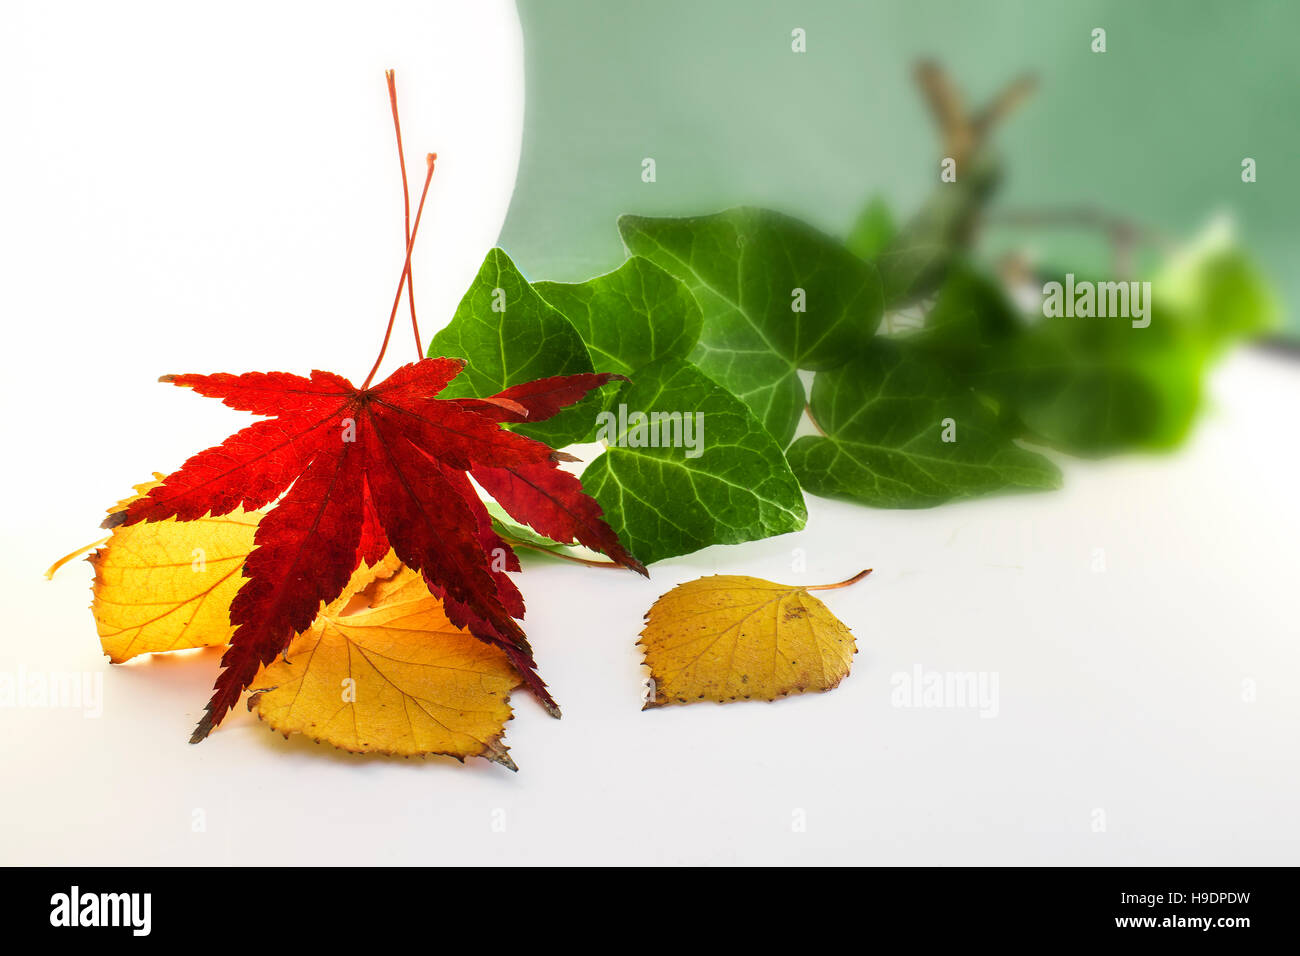 Dry Leaf of Japanese Maple and other Leaves Stock Photo